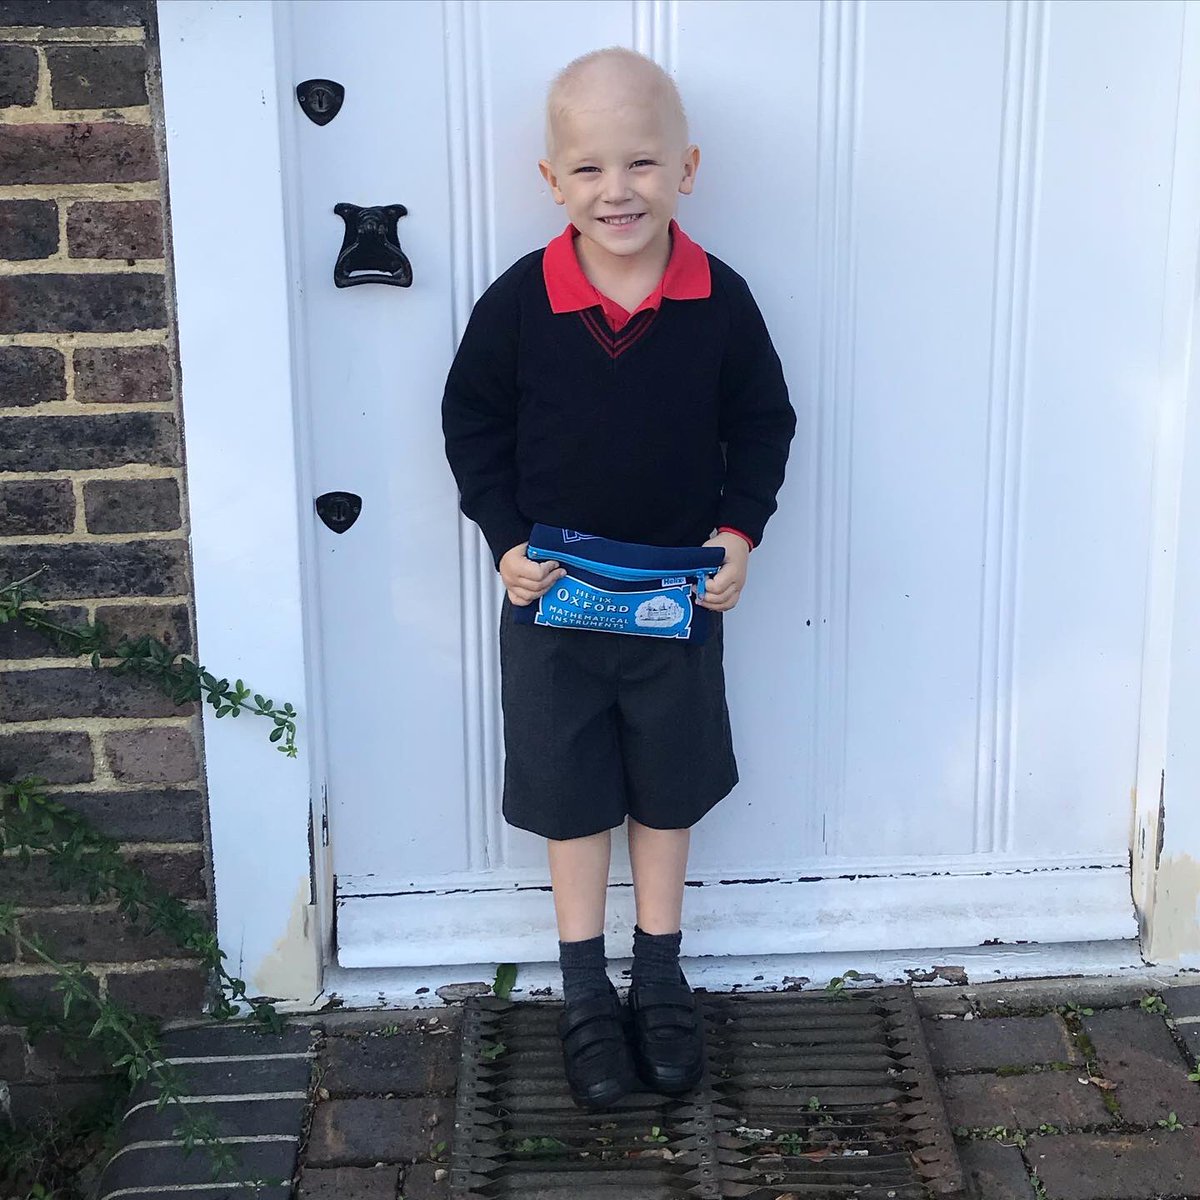 September is Childhood Cancer Awareness Month. Along with funding a research project to help the Harry’s of the future we hope to raise awareness around childhood cancer. To read about Harry’s story and help us fundraise click on the bio link #CCAM #ChildhoodCancerAwarenessMonth